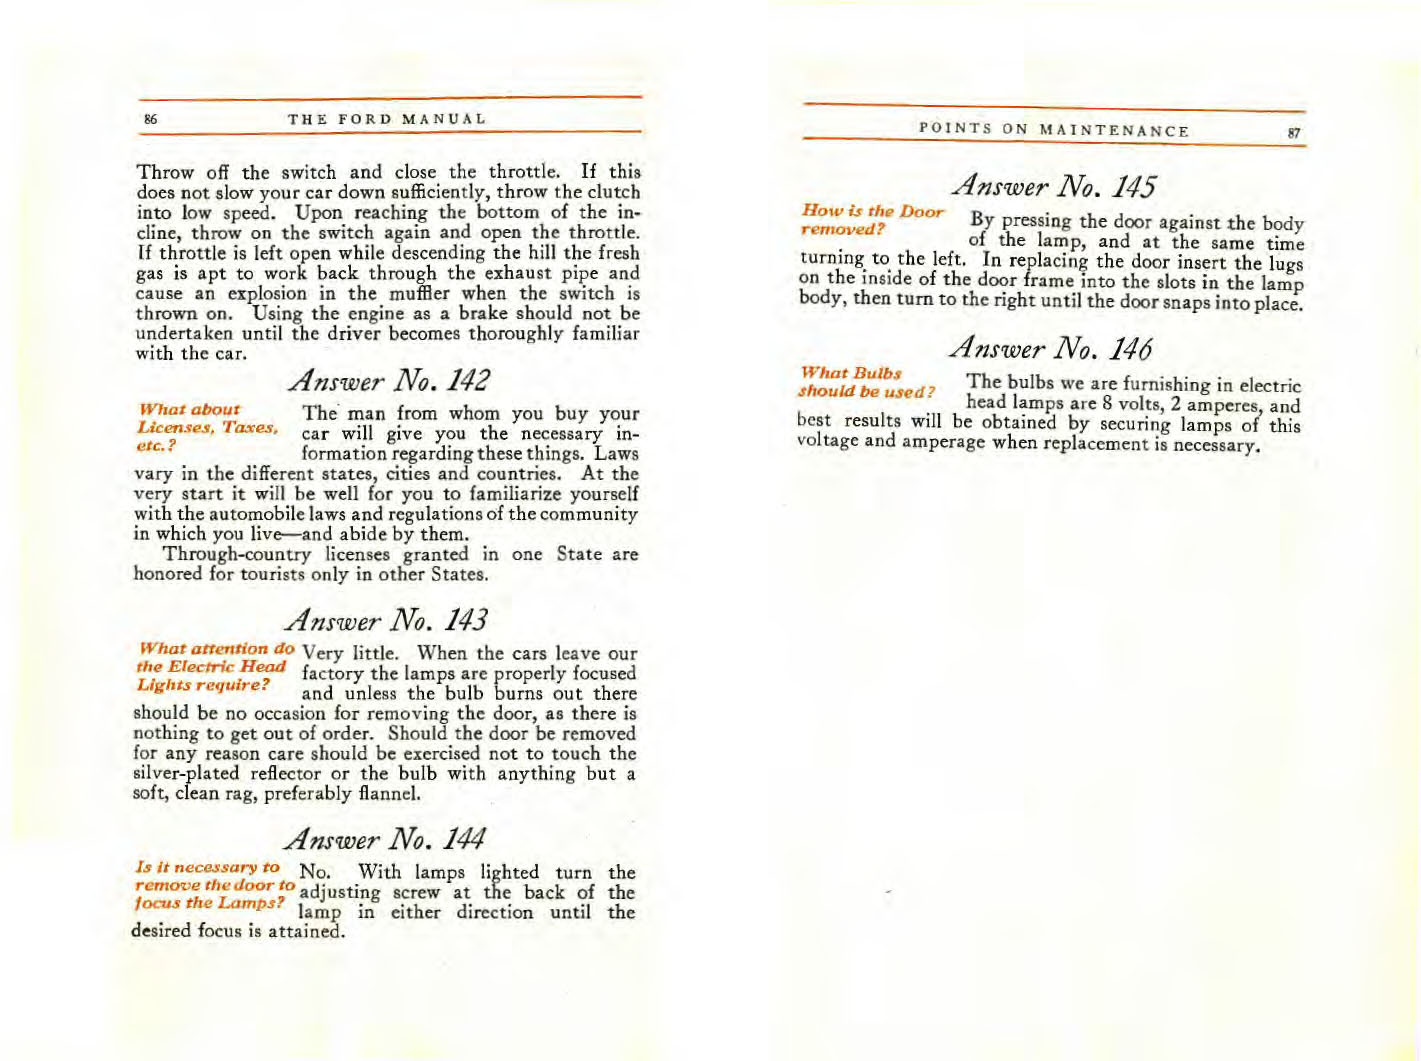 1915_Ford_Owners_Manual-86-87